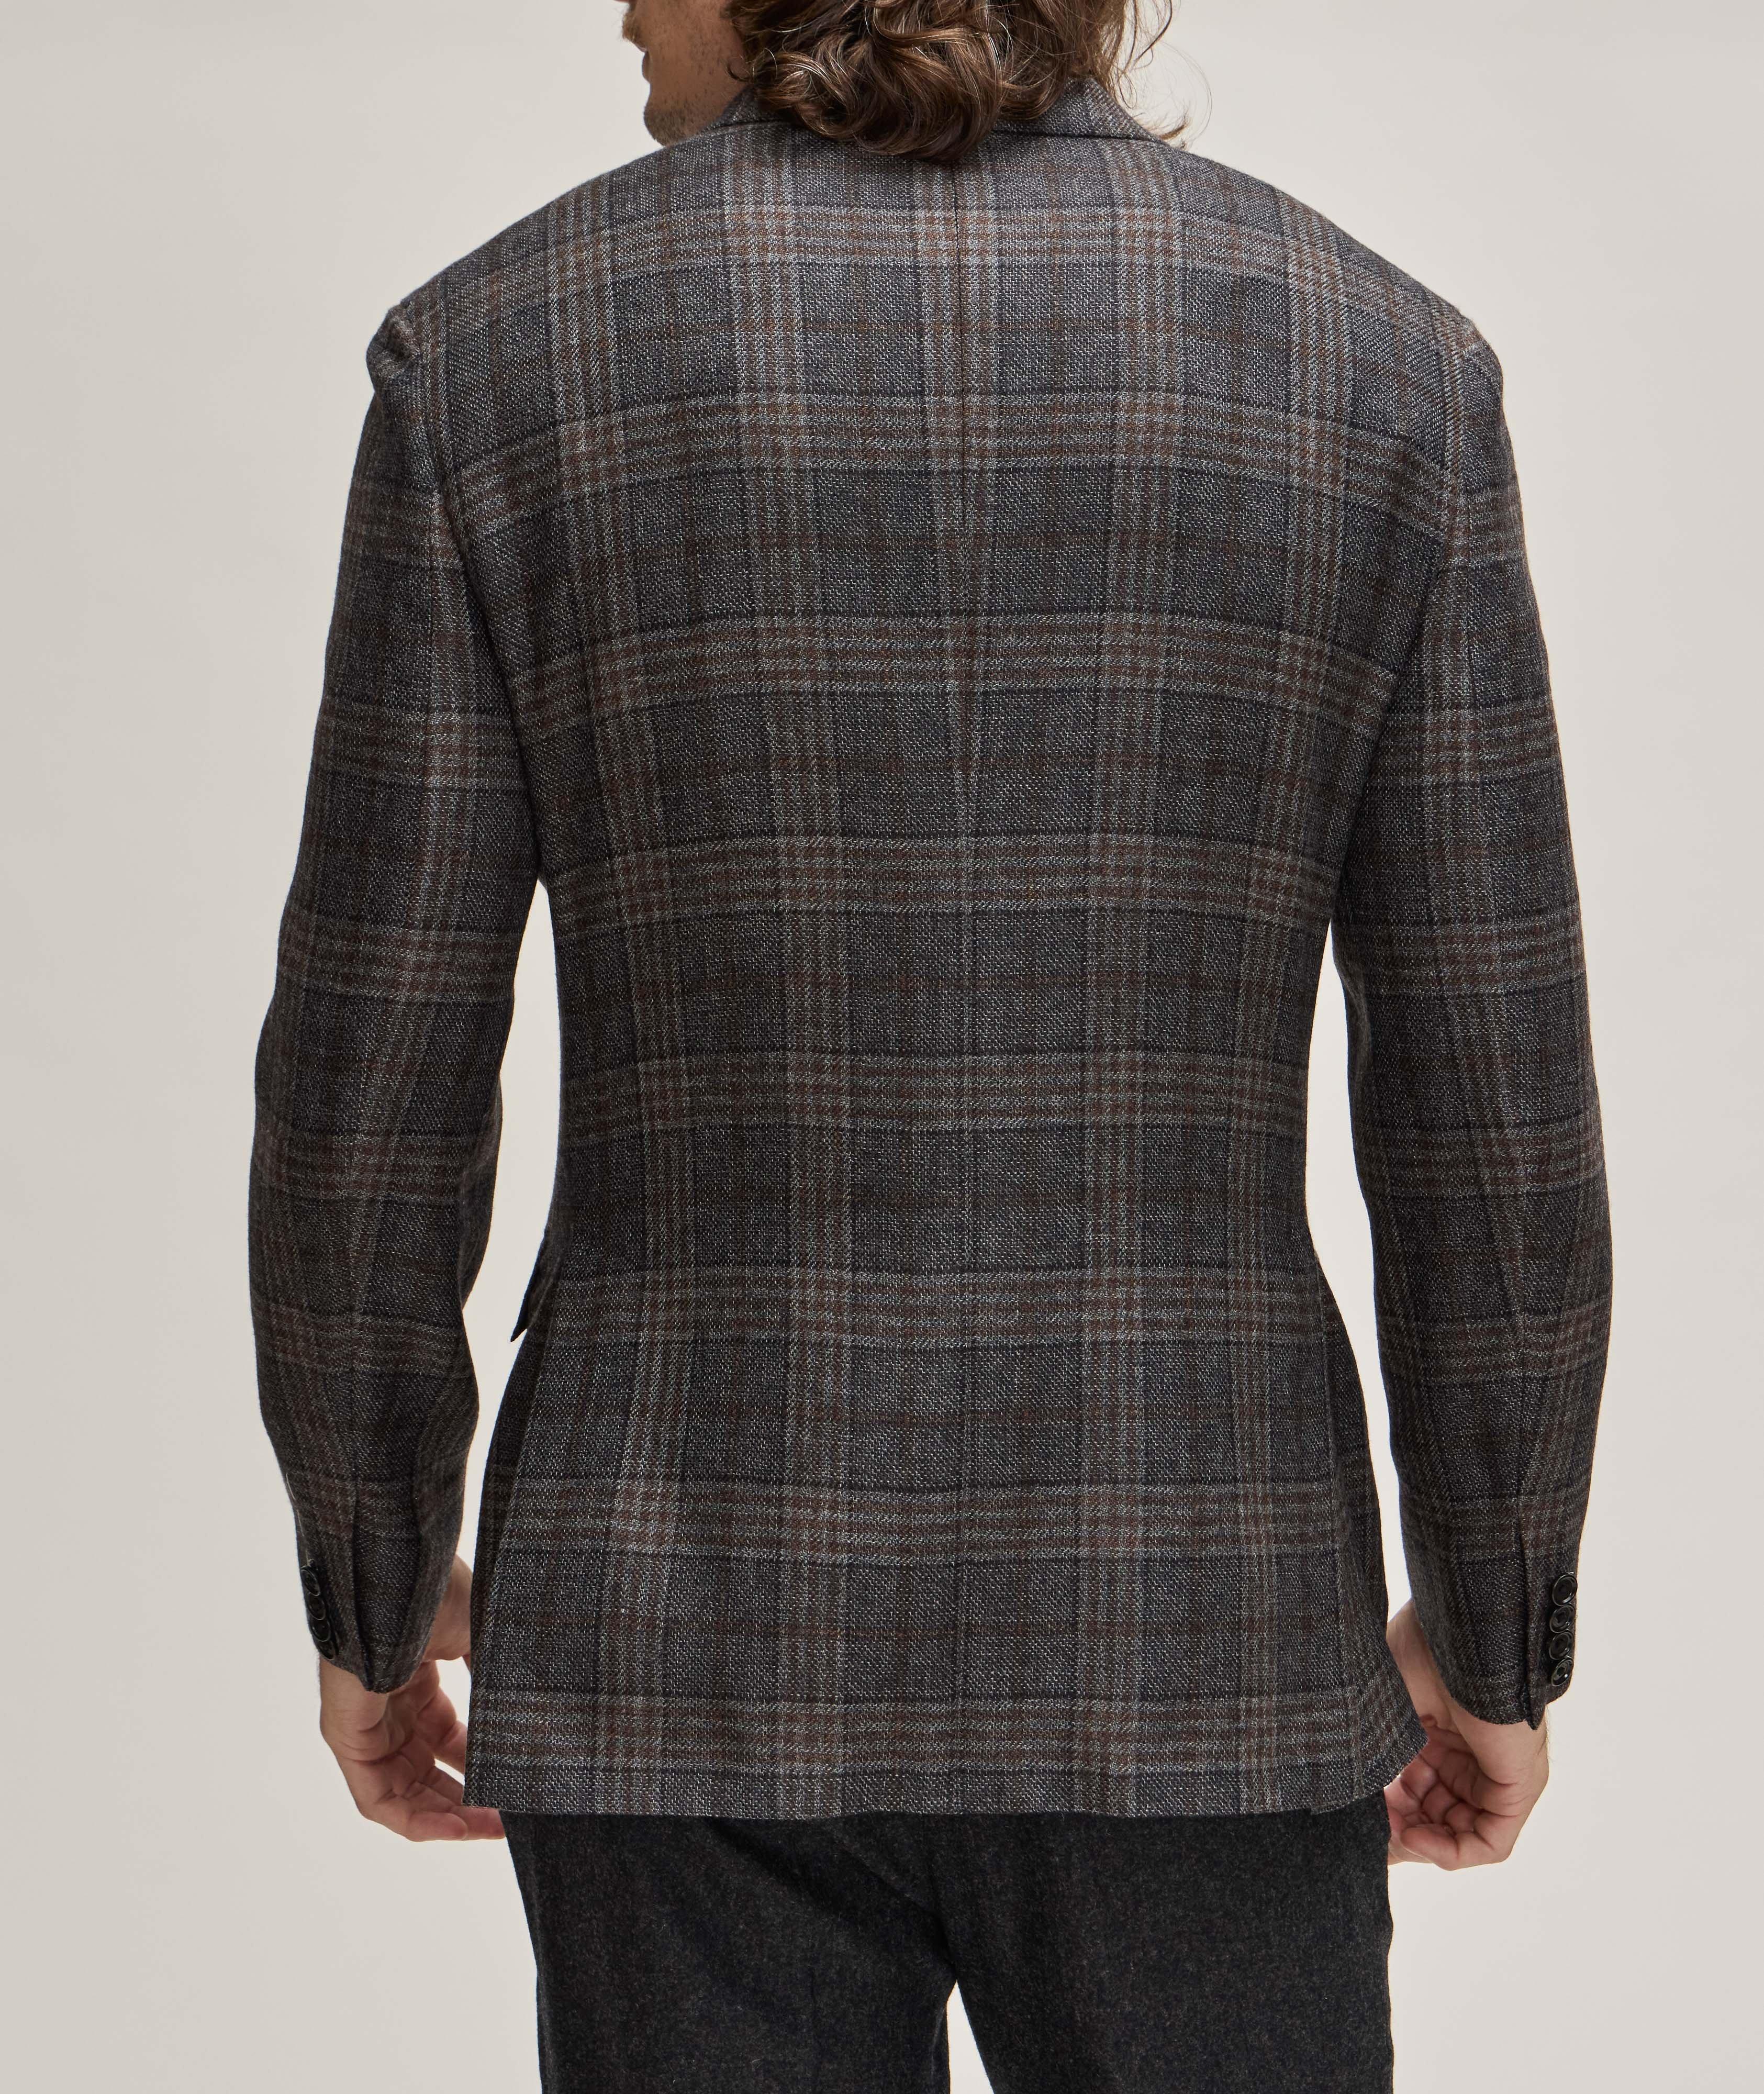 New Plume Prince of Wales Cashmere Sport Jacket image 2